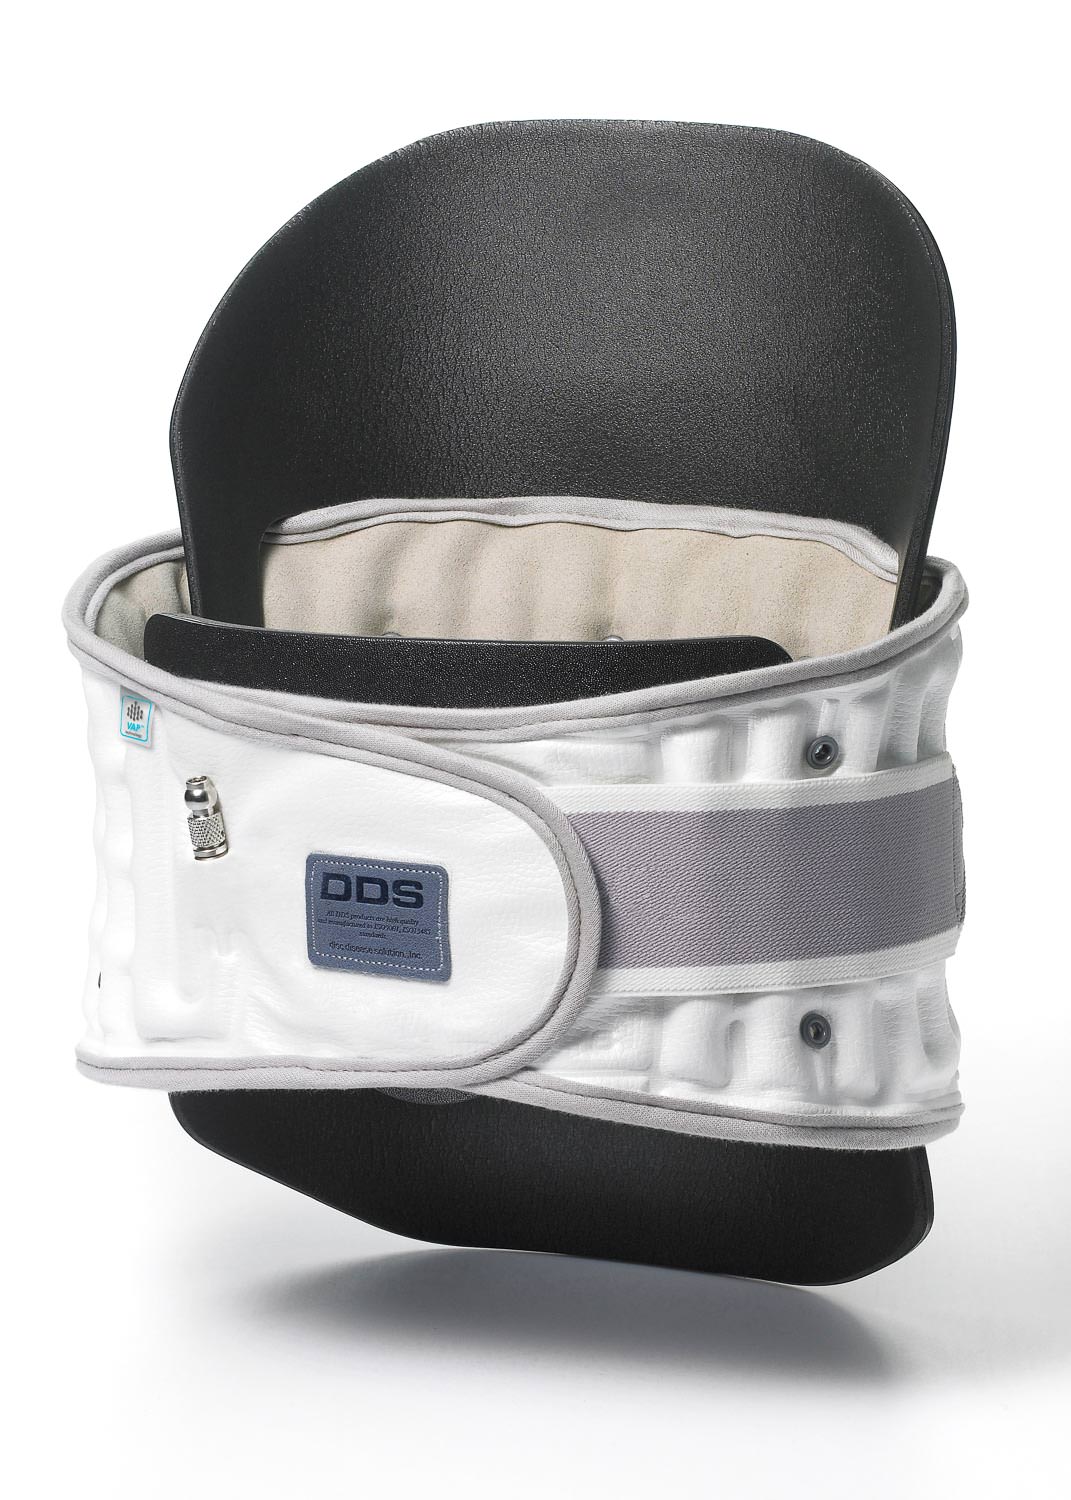 DDS 500 - Lumbar Sacral Orthosis Brace with no pump